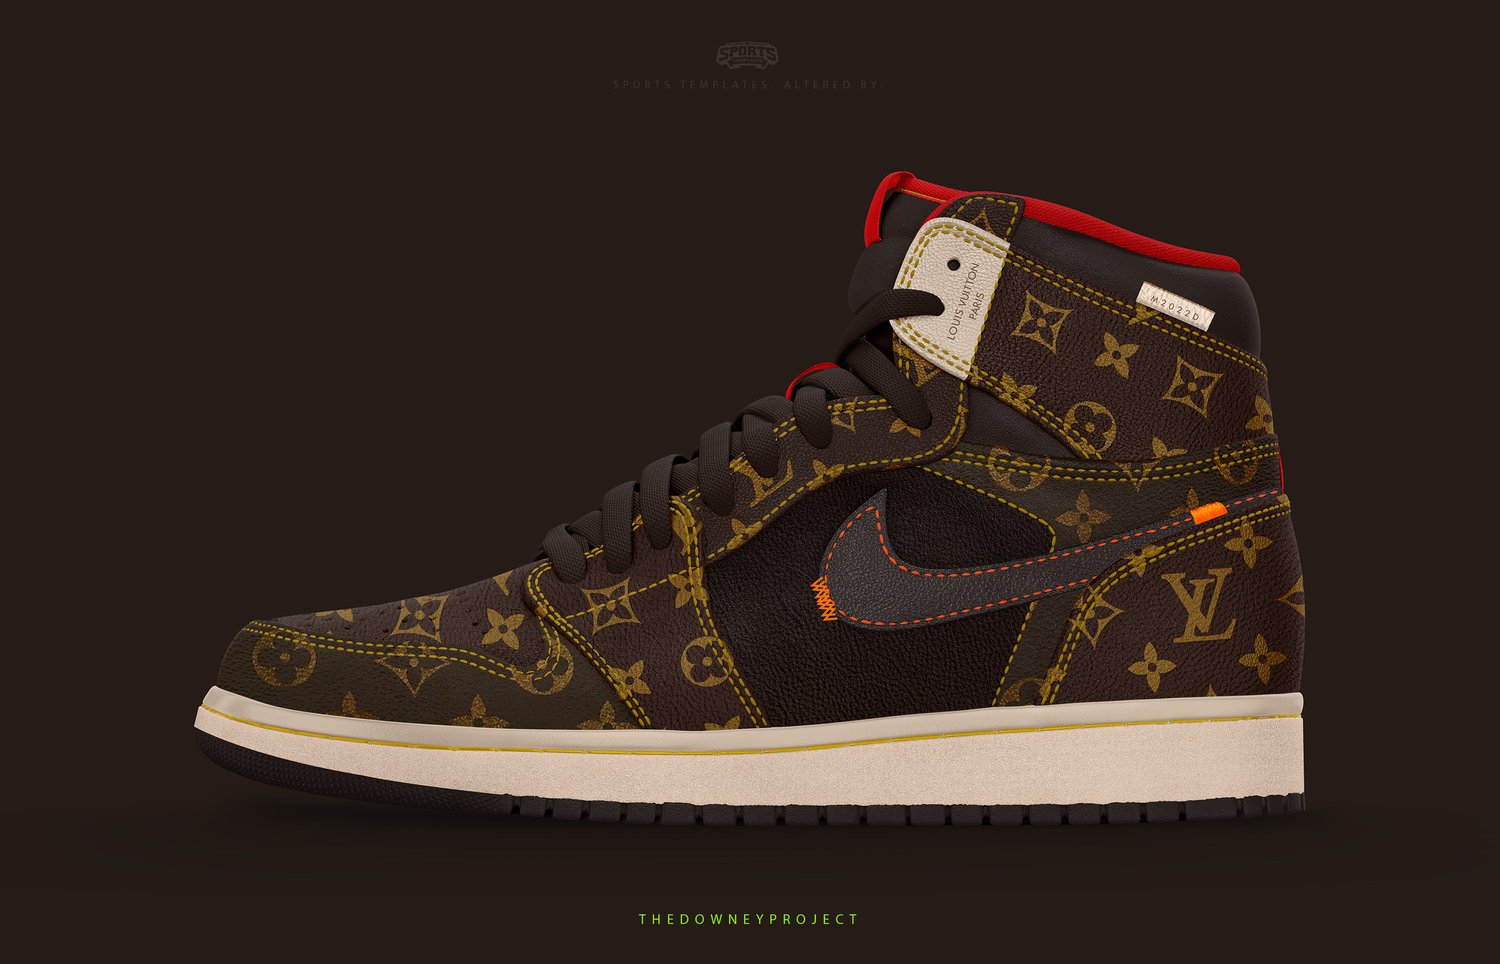 Louis Vuitton x Nike Red/White Monogram Canvas and Leather Air